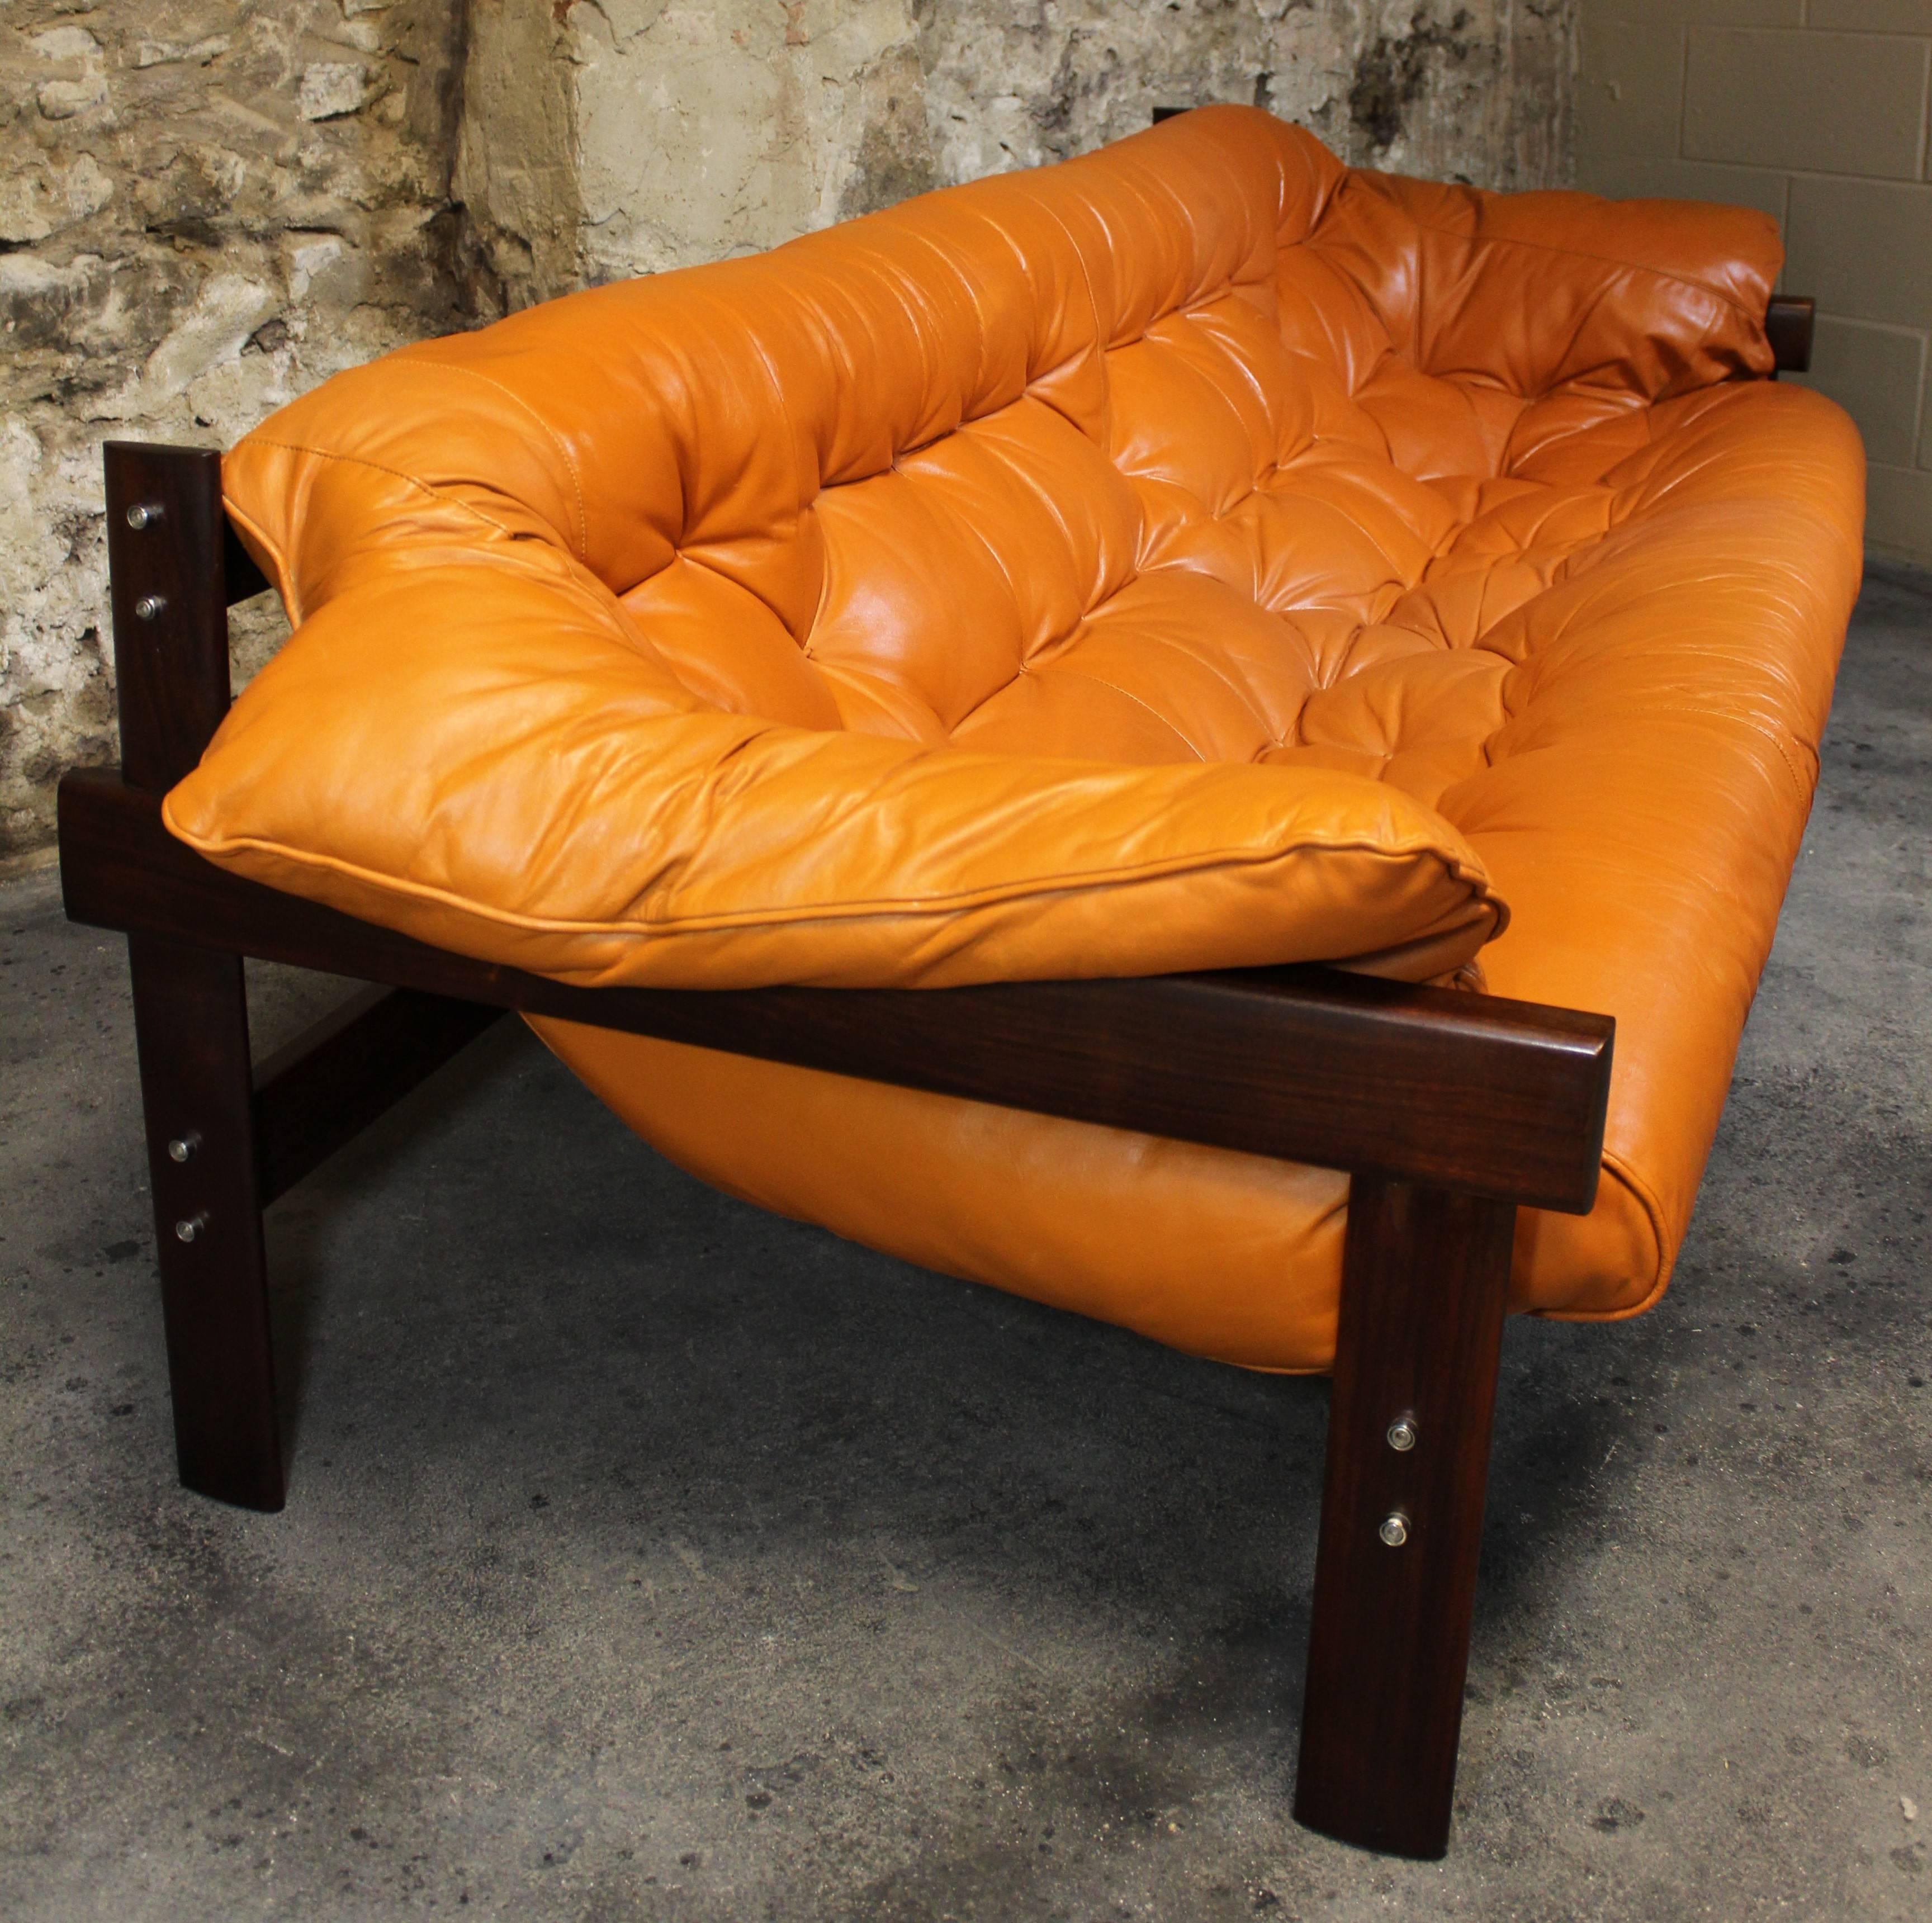 Absolutely stunning leather and jacaranda wood (Brazilian rosewood) sling sofa by iconic Brazilian designer Percival Lafer. Designed in the 1970s, this sofa features chrome accents, burnt orange tufted leather upholstery and an exotic rosewood frame